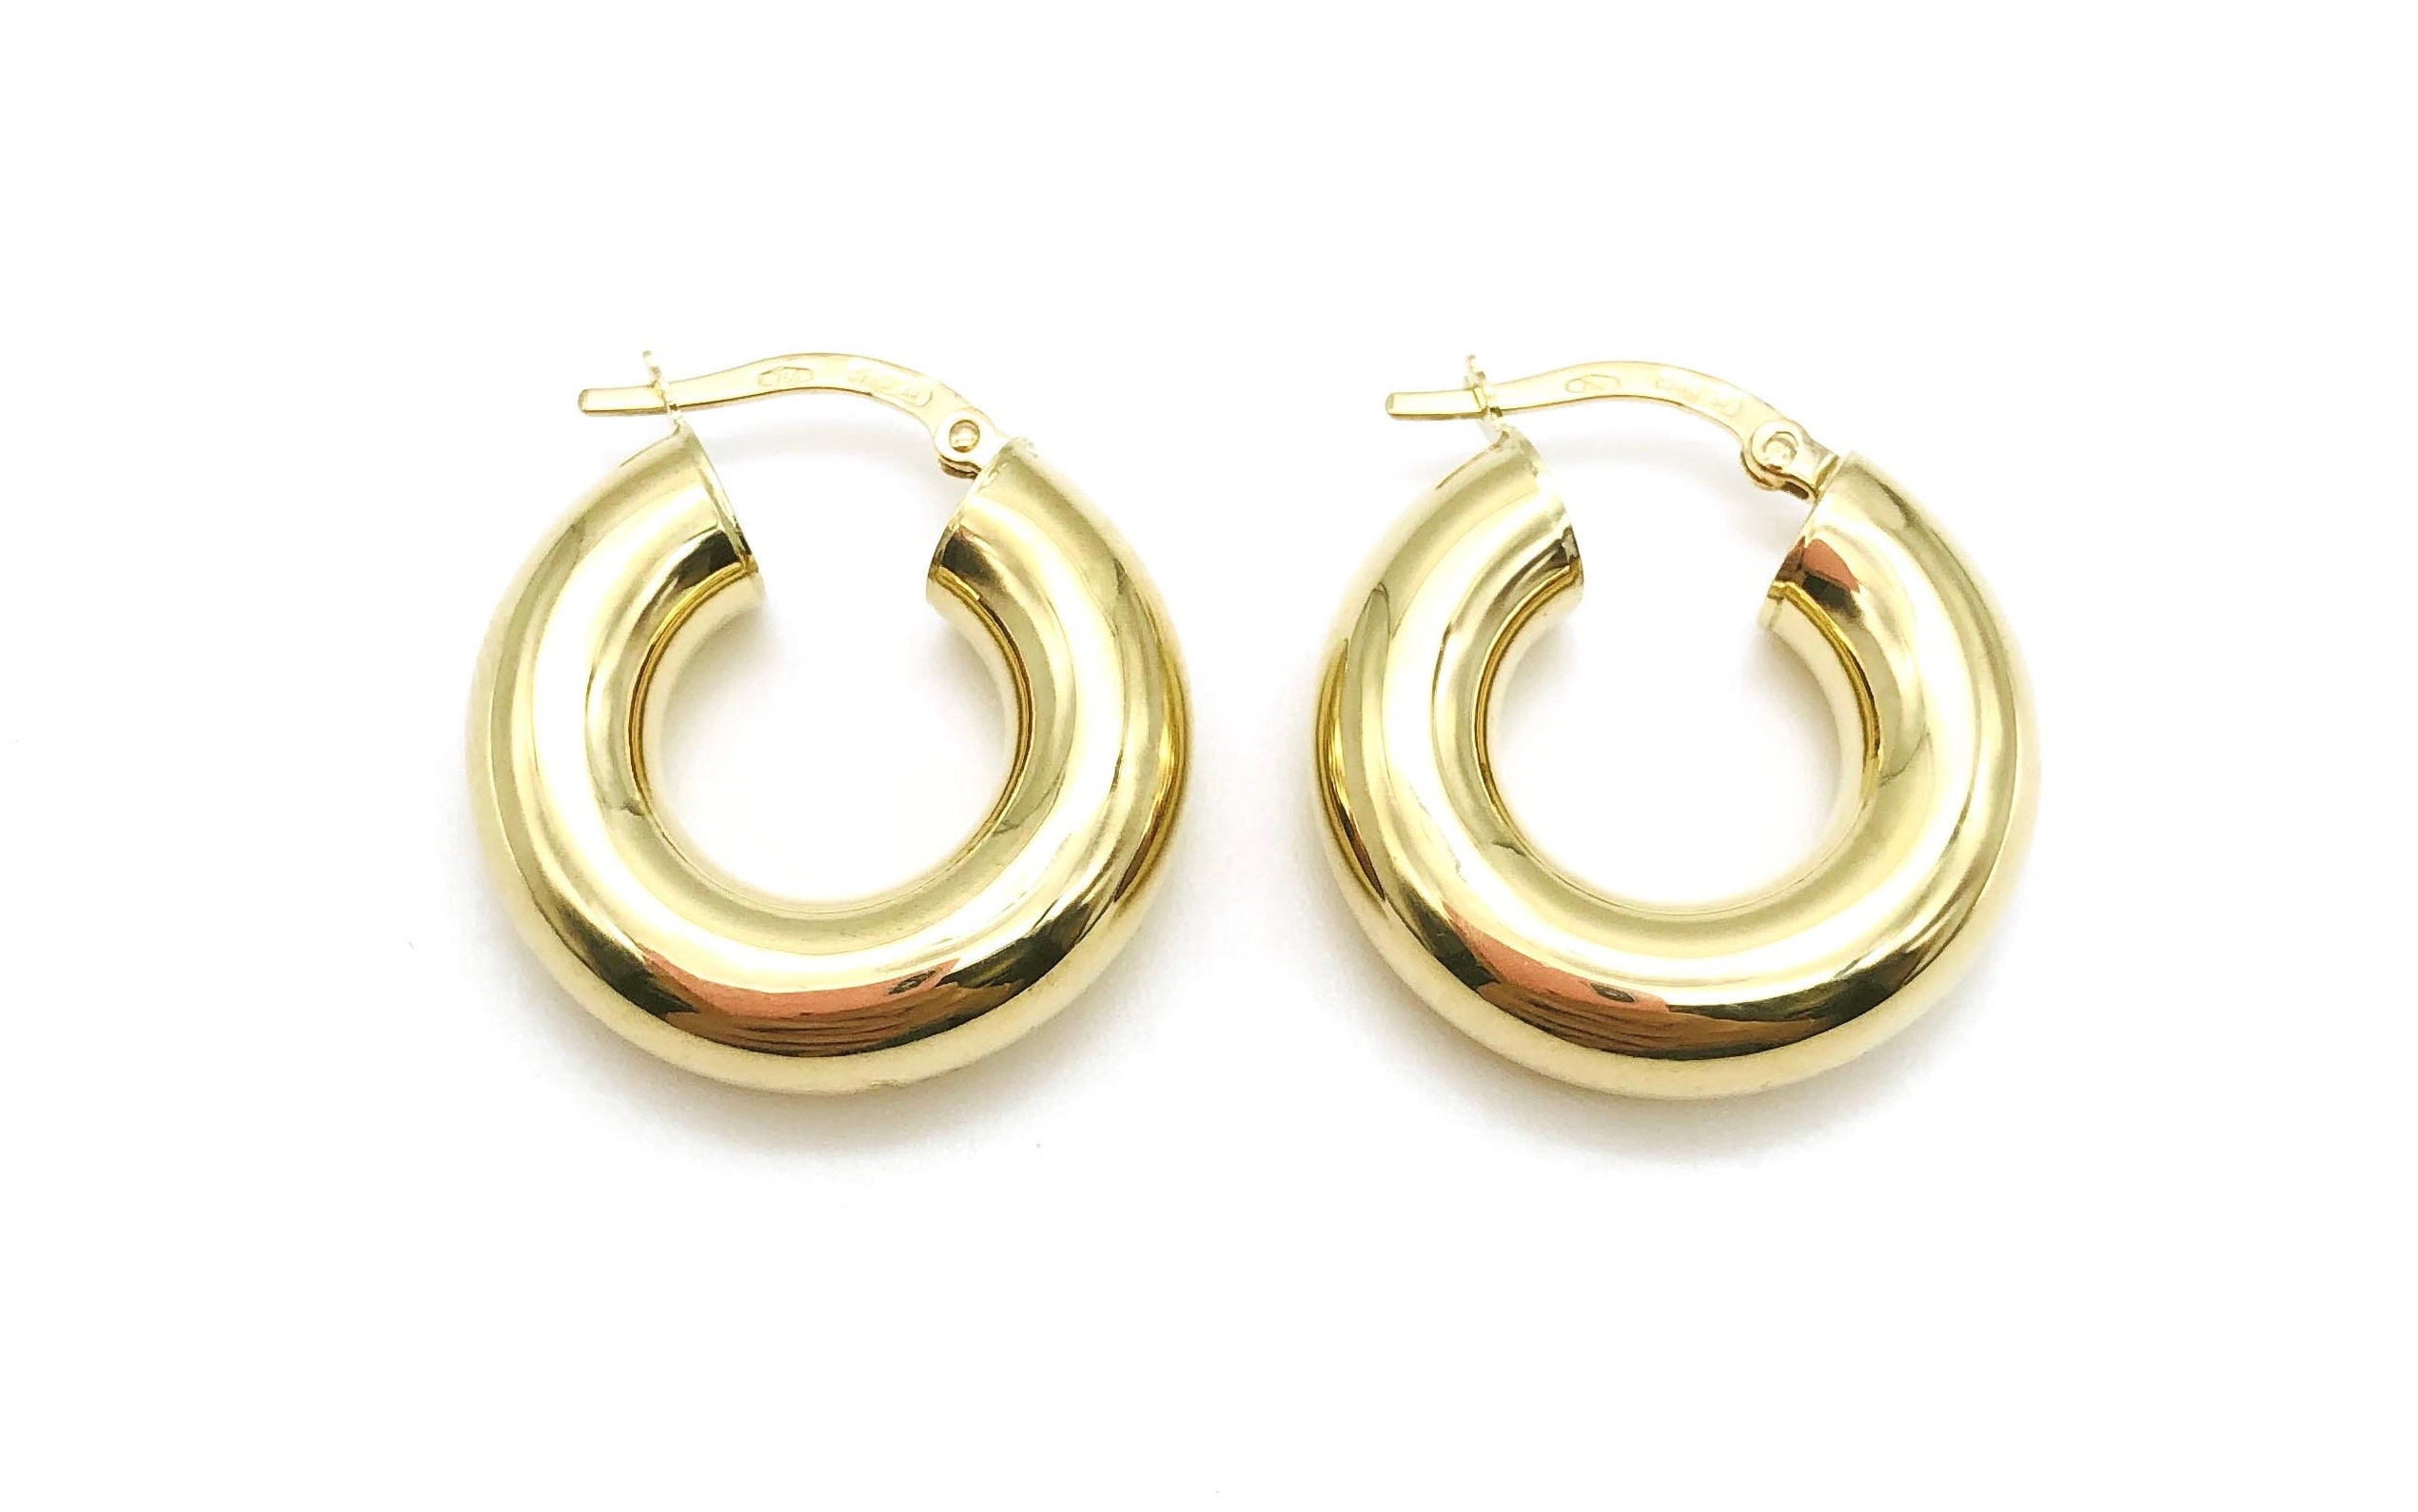 18K Yellow Gold Hoop Earrings Hoops Dainty Polished Italian Chubby Gift For Her Made in Italy